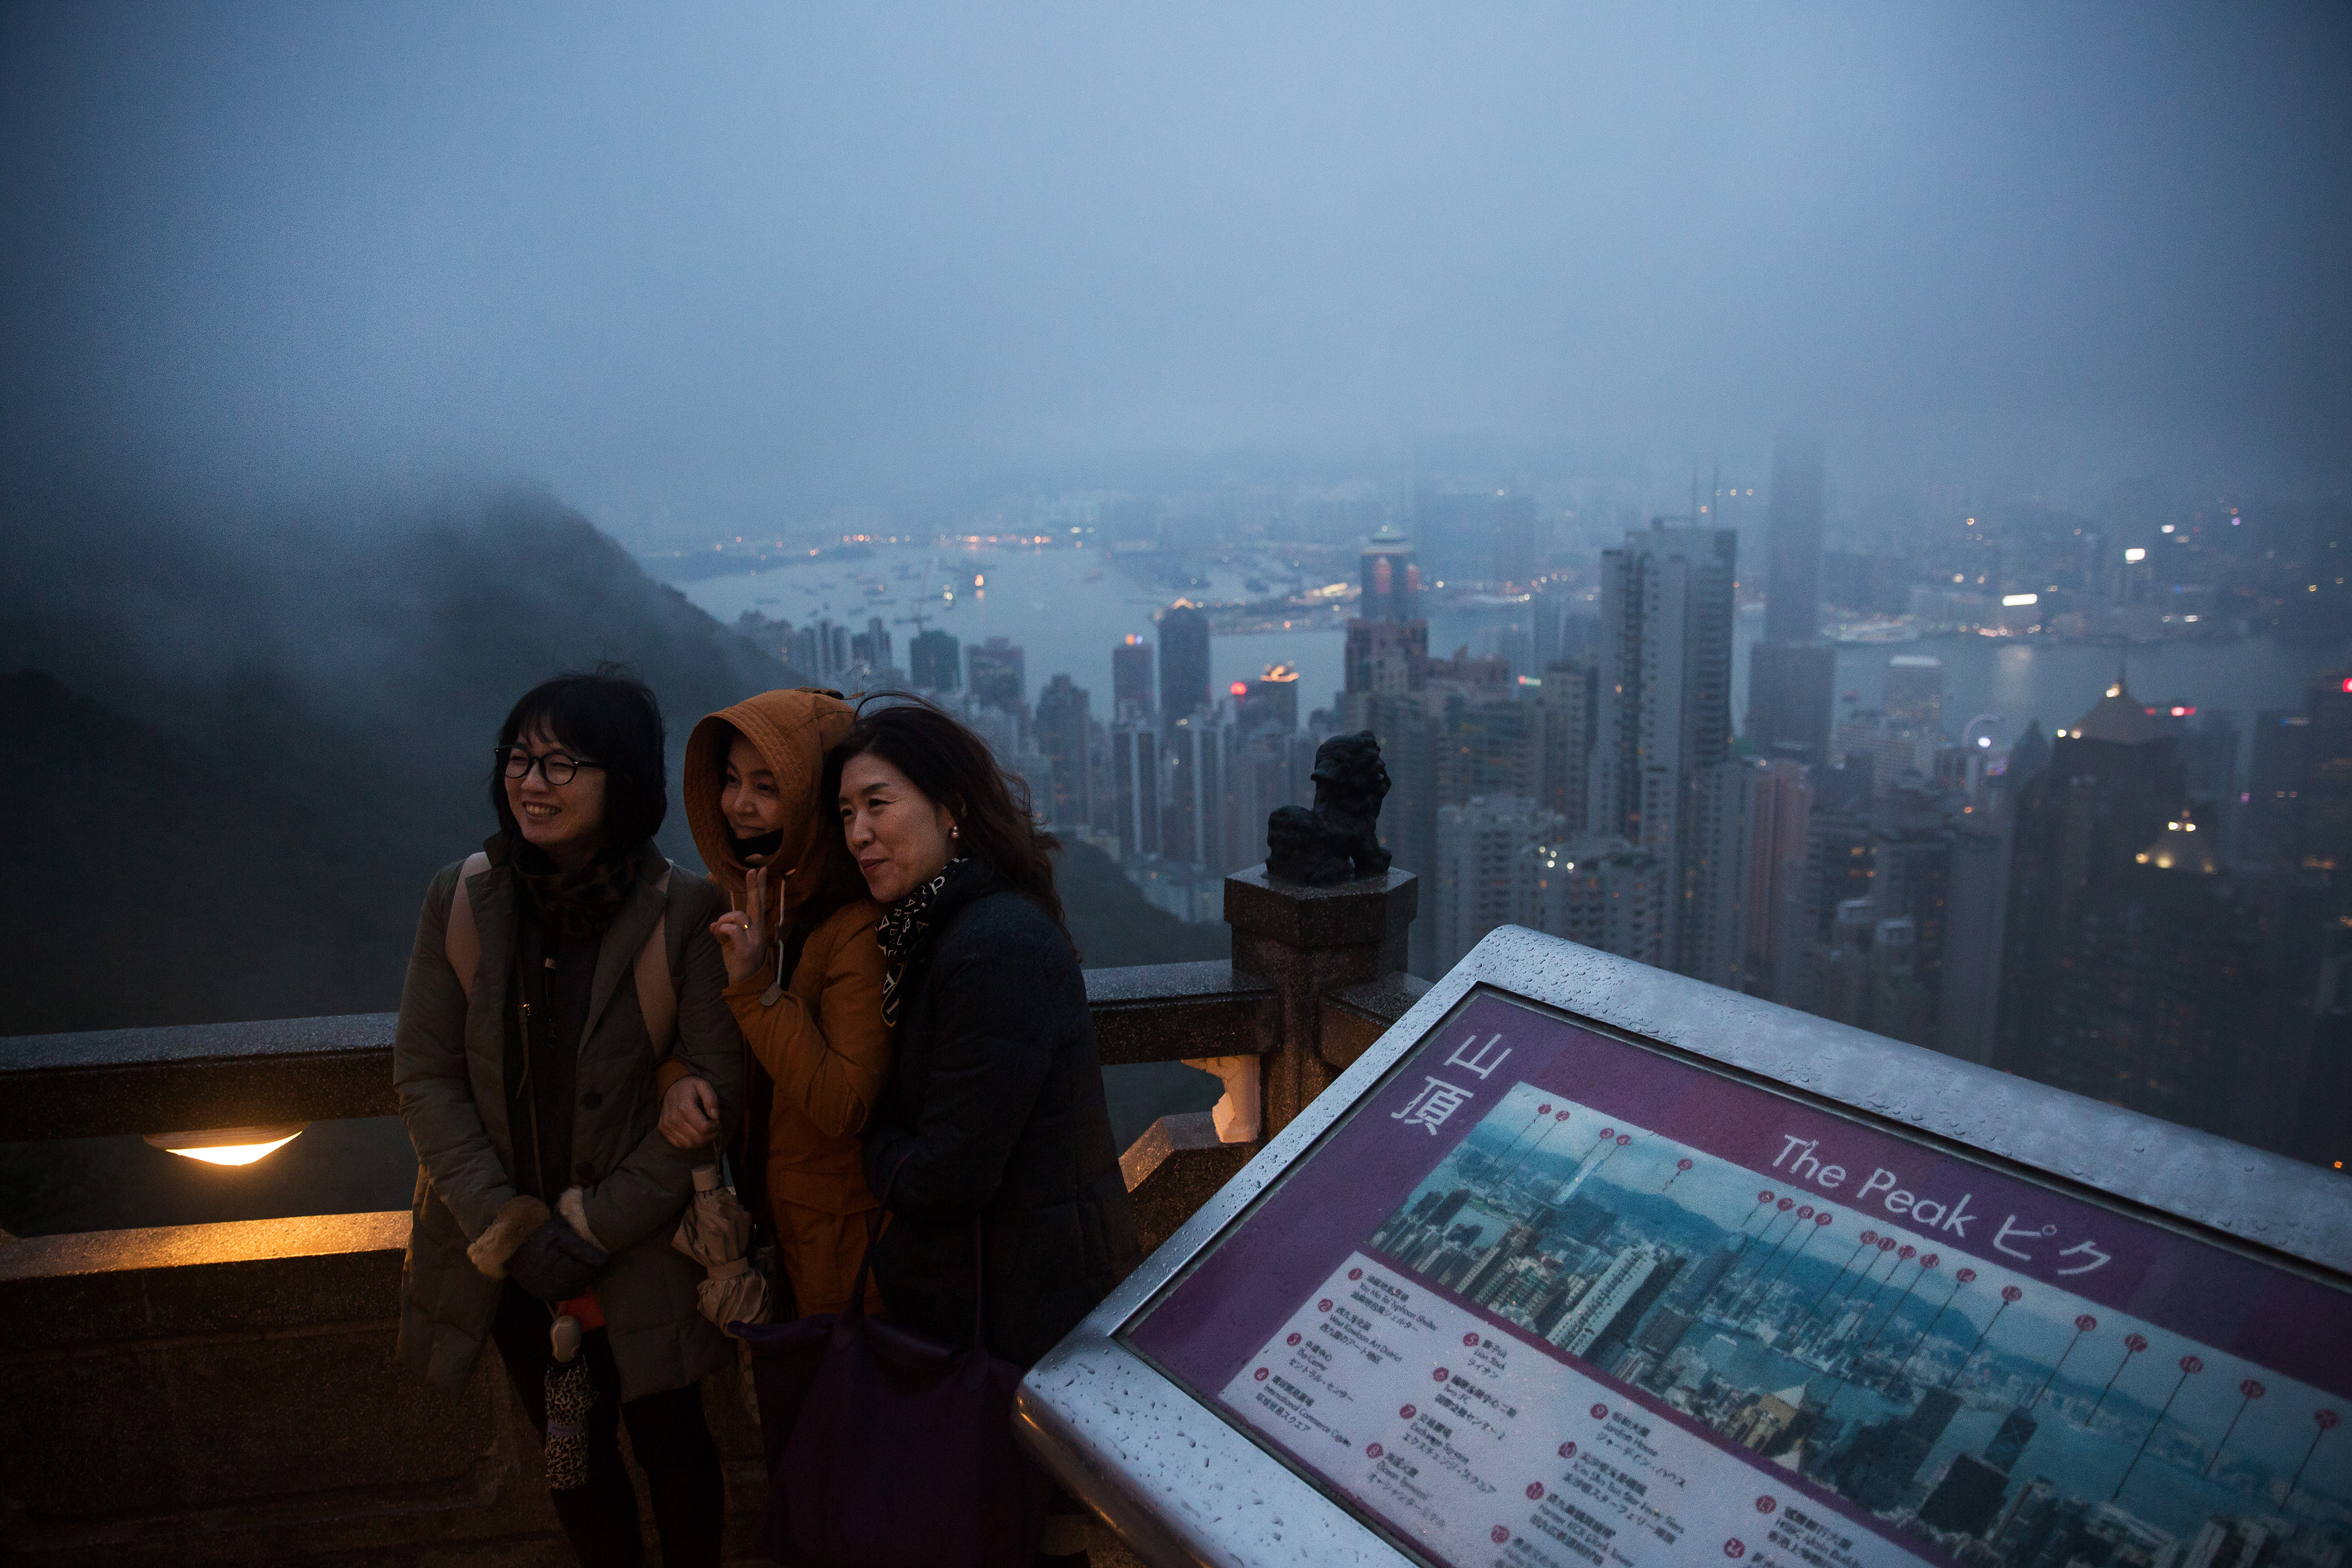 Tourists pose for a photograph as buildings in the background stand shrouded in haze on Victoria Peak in Hong Kong, China, on Friday, Jan. 22, 2016. Hong Kong is expected to grow at a slower pace this year than in 2015 as the city's economy is constrained by difficulties in its exports sector and lower spending by visiting tourists, according to K.C. Chan, Hong Kong's secretary for financial services and the treasury. Photographer: Billy H.C. Kwok/Bloomberg